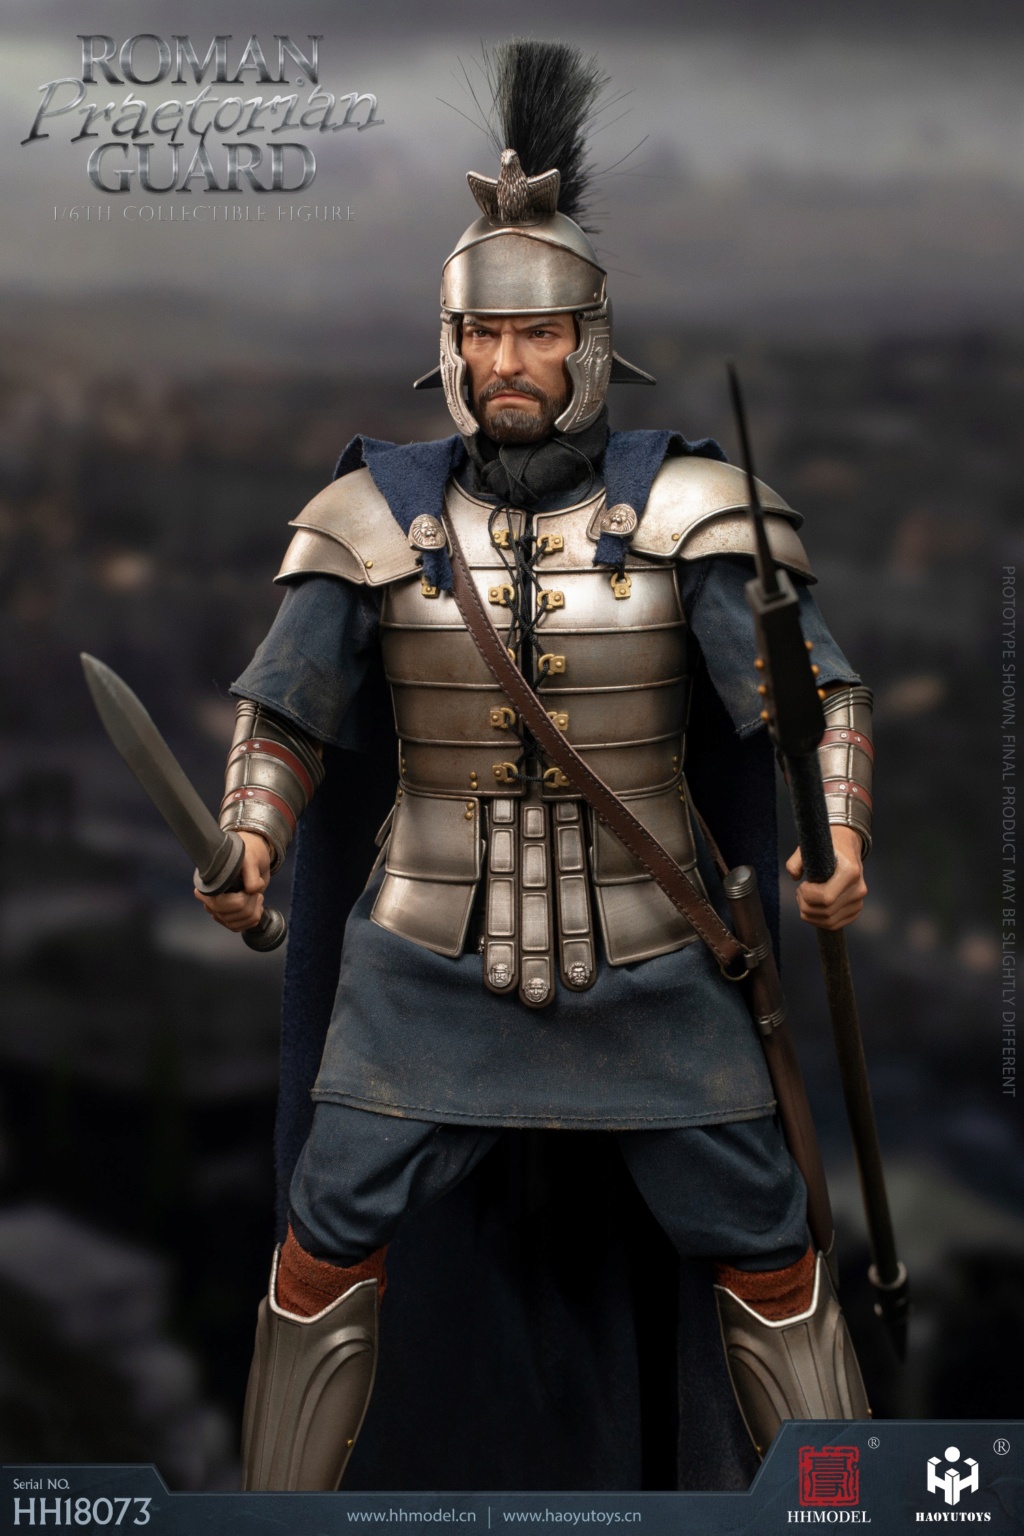 newproduct - NEW PRODUCT: HHMODEL & HAOYUTOYS: 1/6 Imperial Army-Silver Roman Guard #H18073 15433610